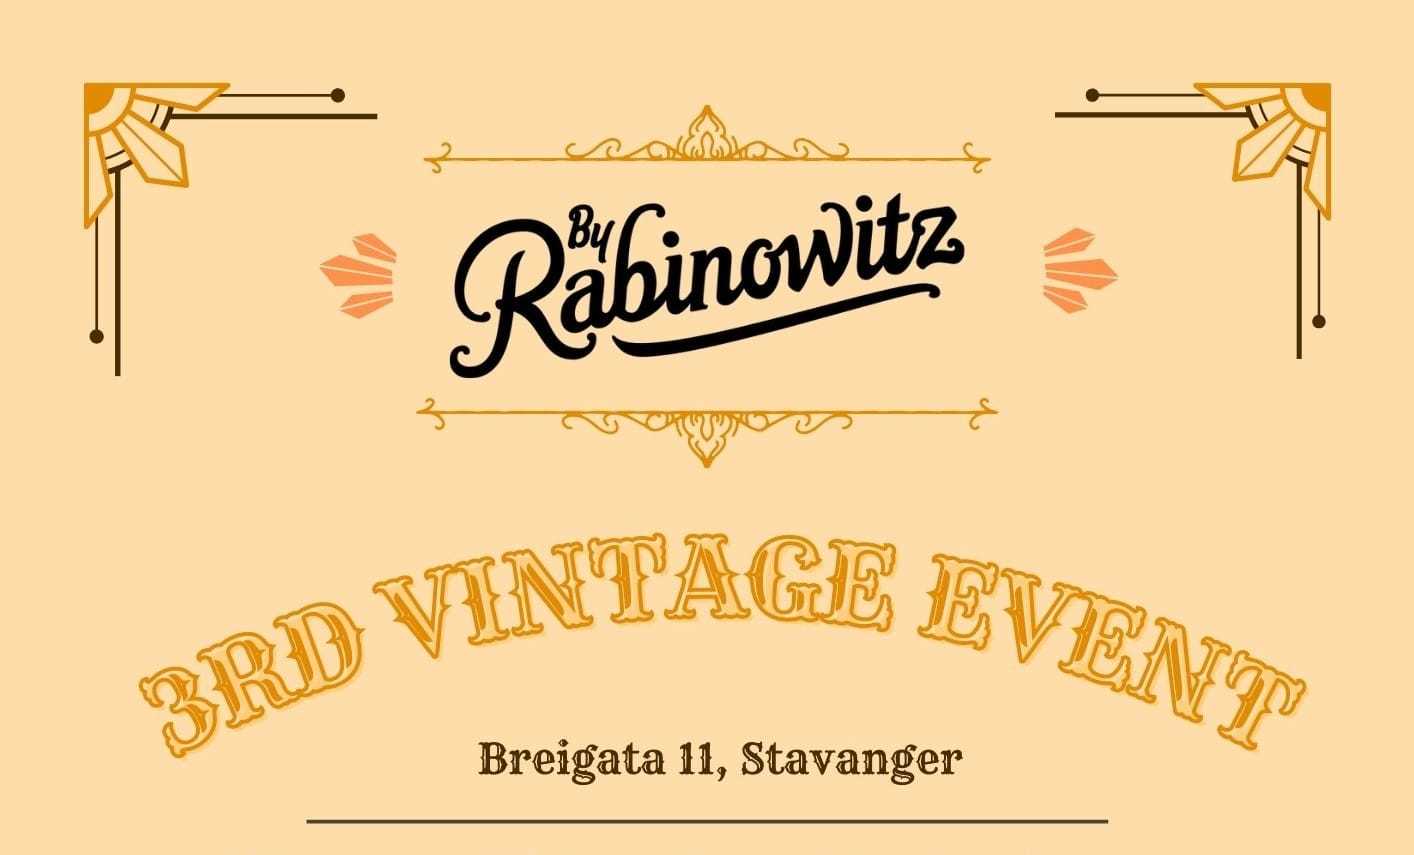 3rd Vintage Event! By Rabinowitz